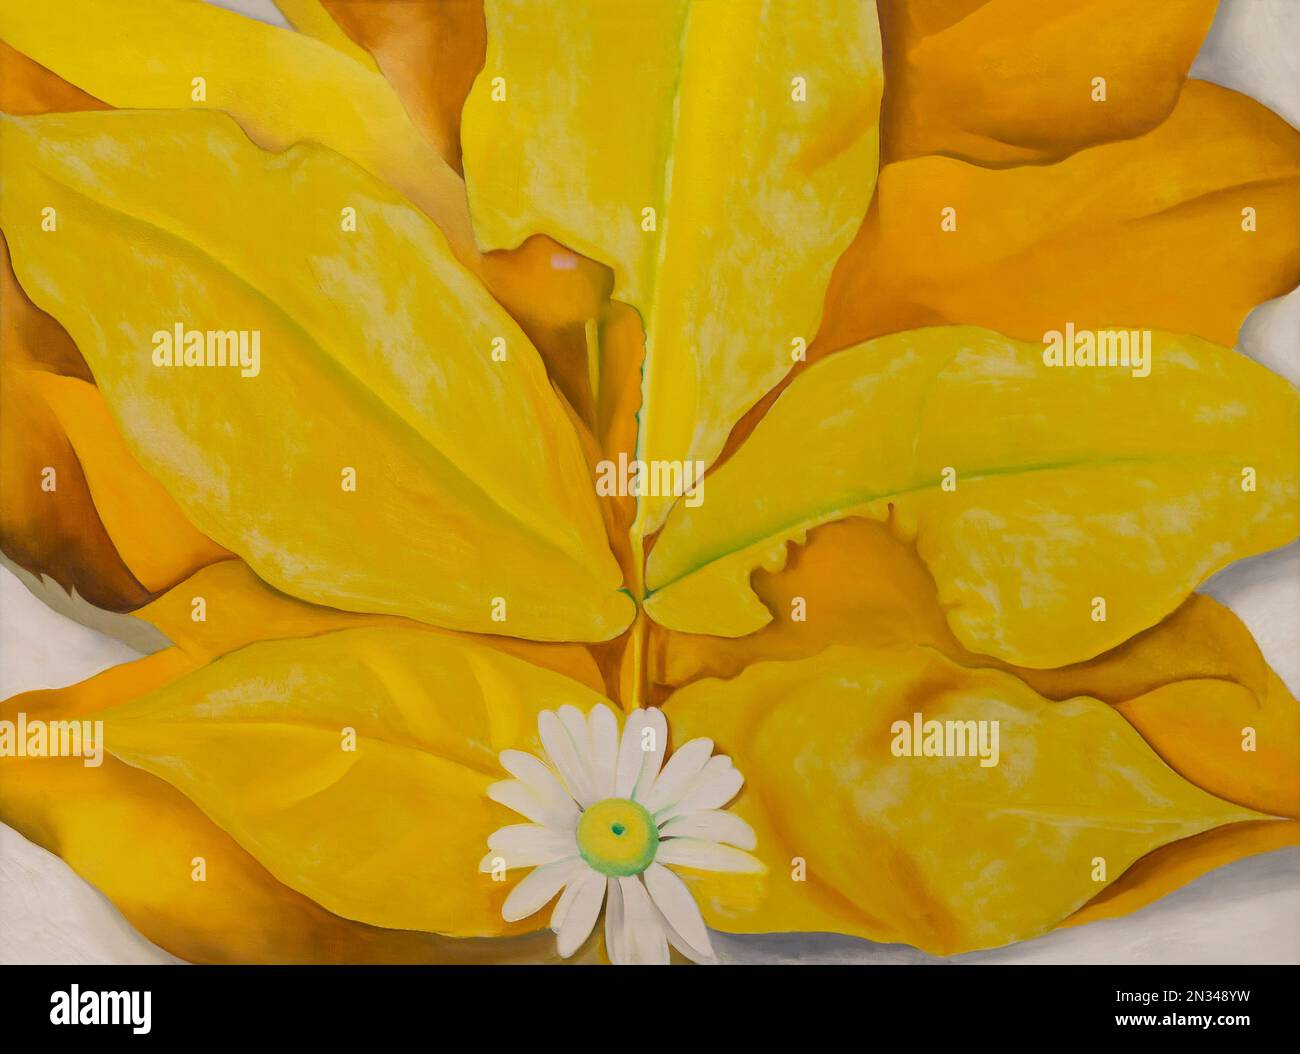 Yellow Hickory Leaves with Daisy, Georgia O'Keeffe, 1928, Art Institute of Chicago, Chicago, Illinois, USA, North America Stock Photo